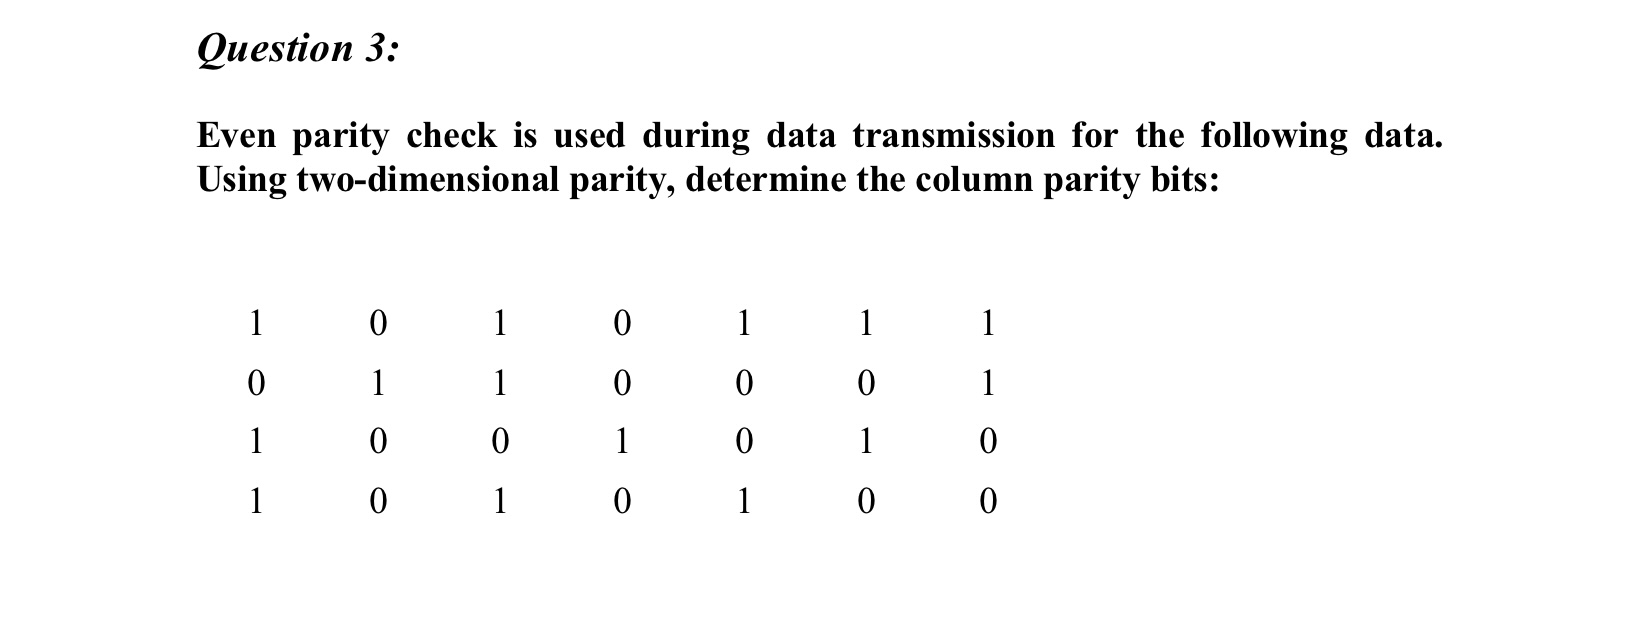 Question 3: Even parity check is used during data transmission for the following data. Using two-dimensional